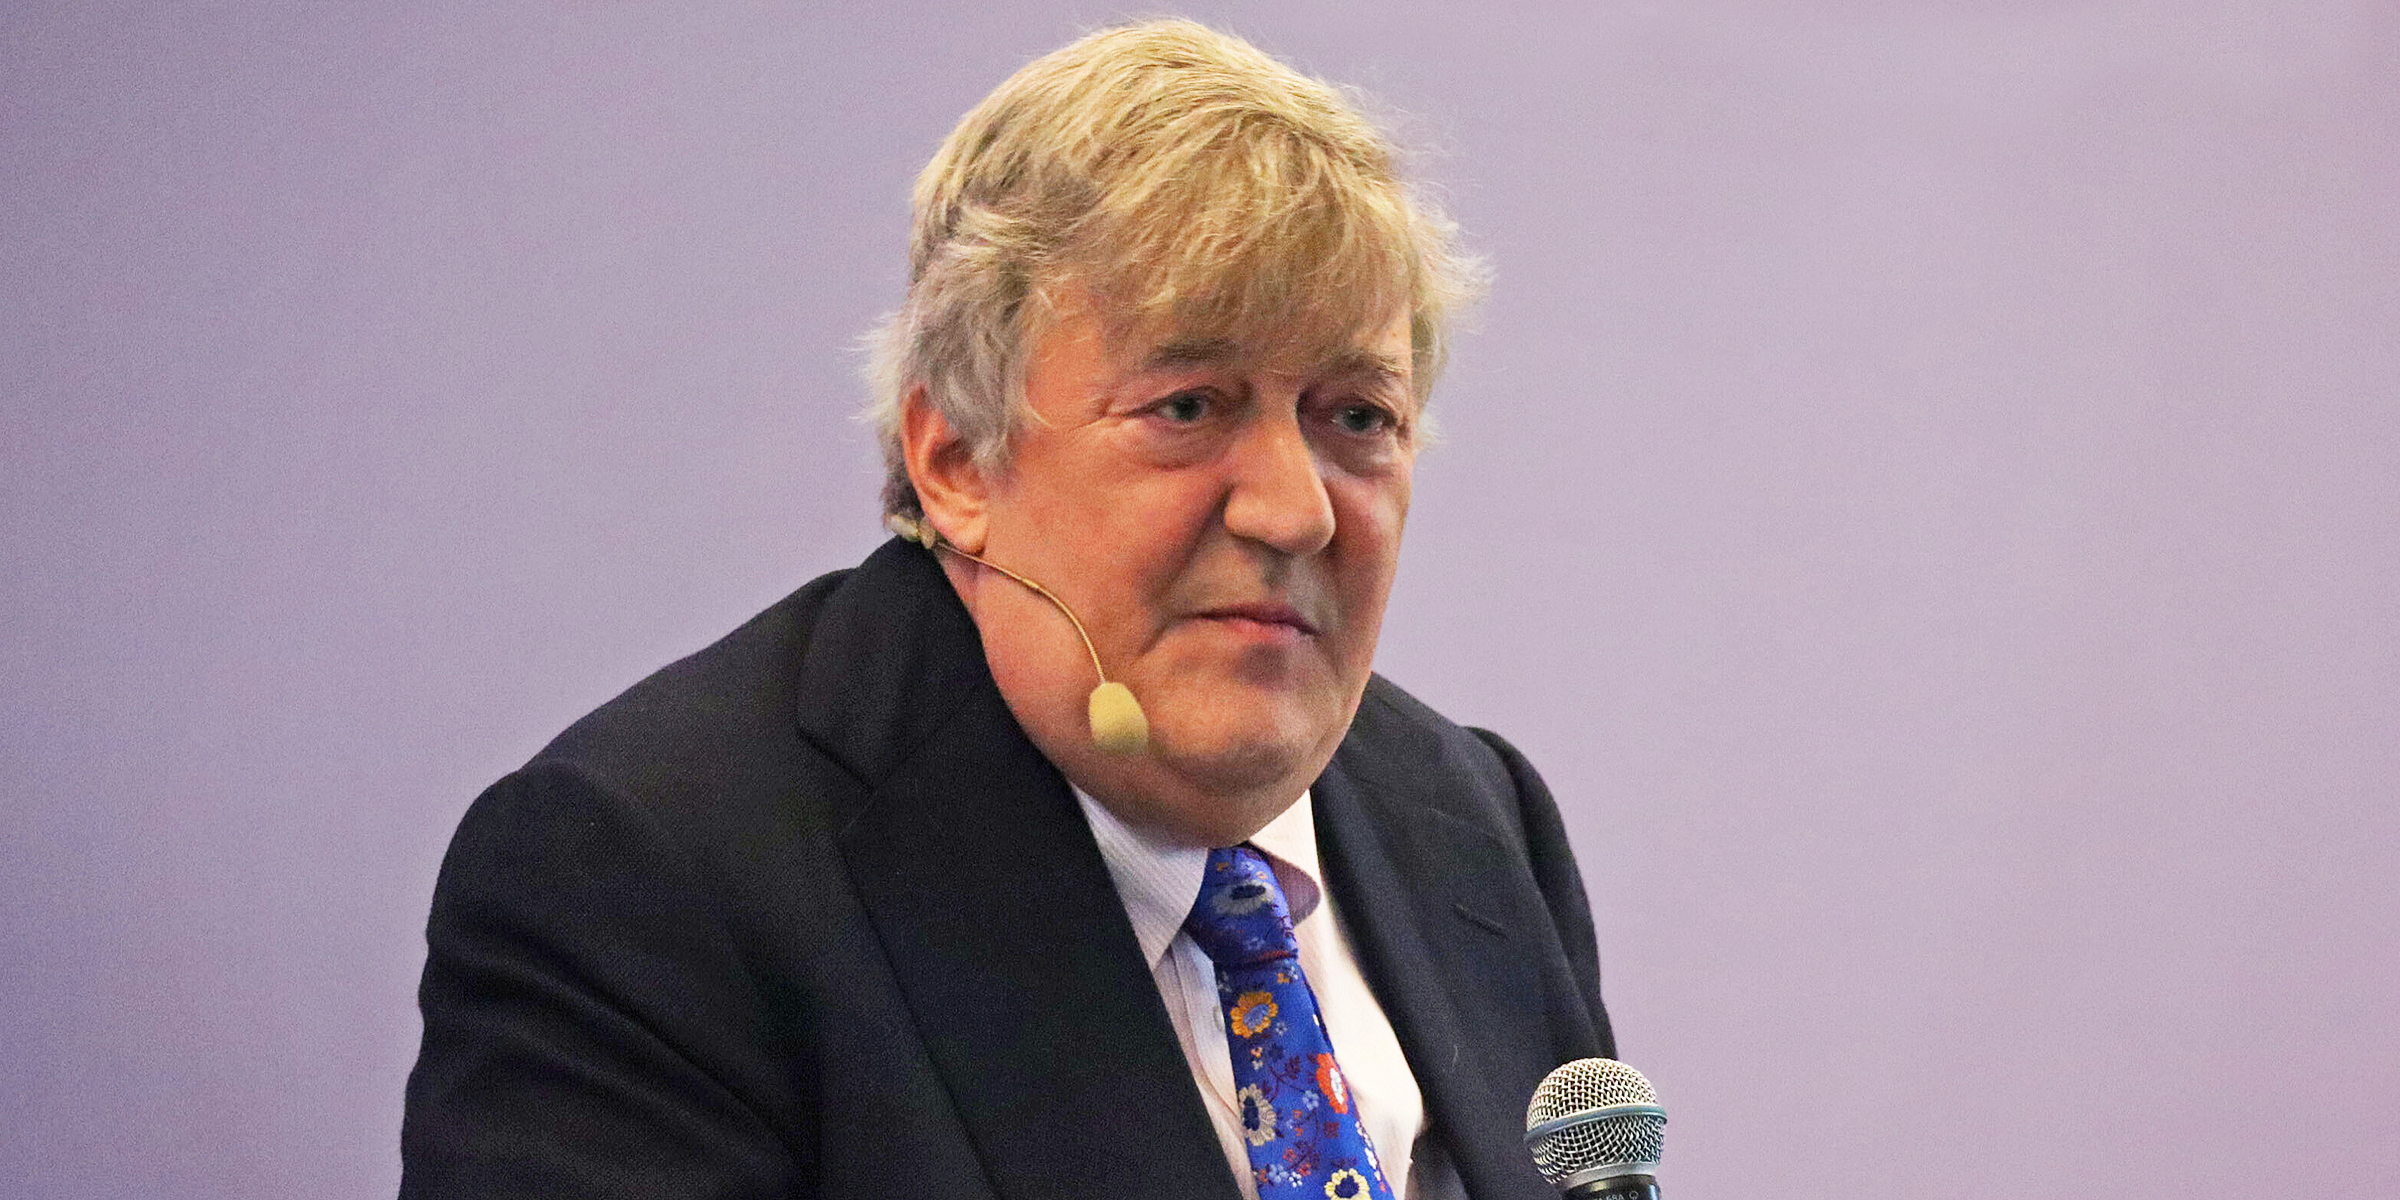 Stephen Fry | Source : Getty Images